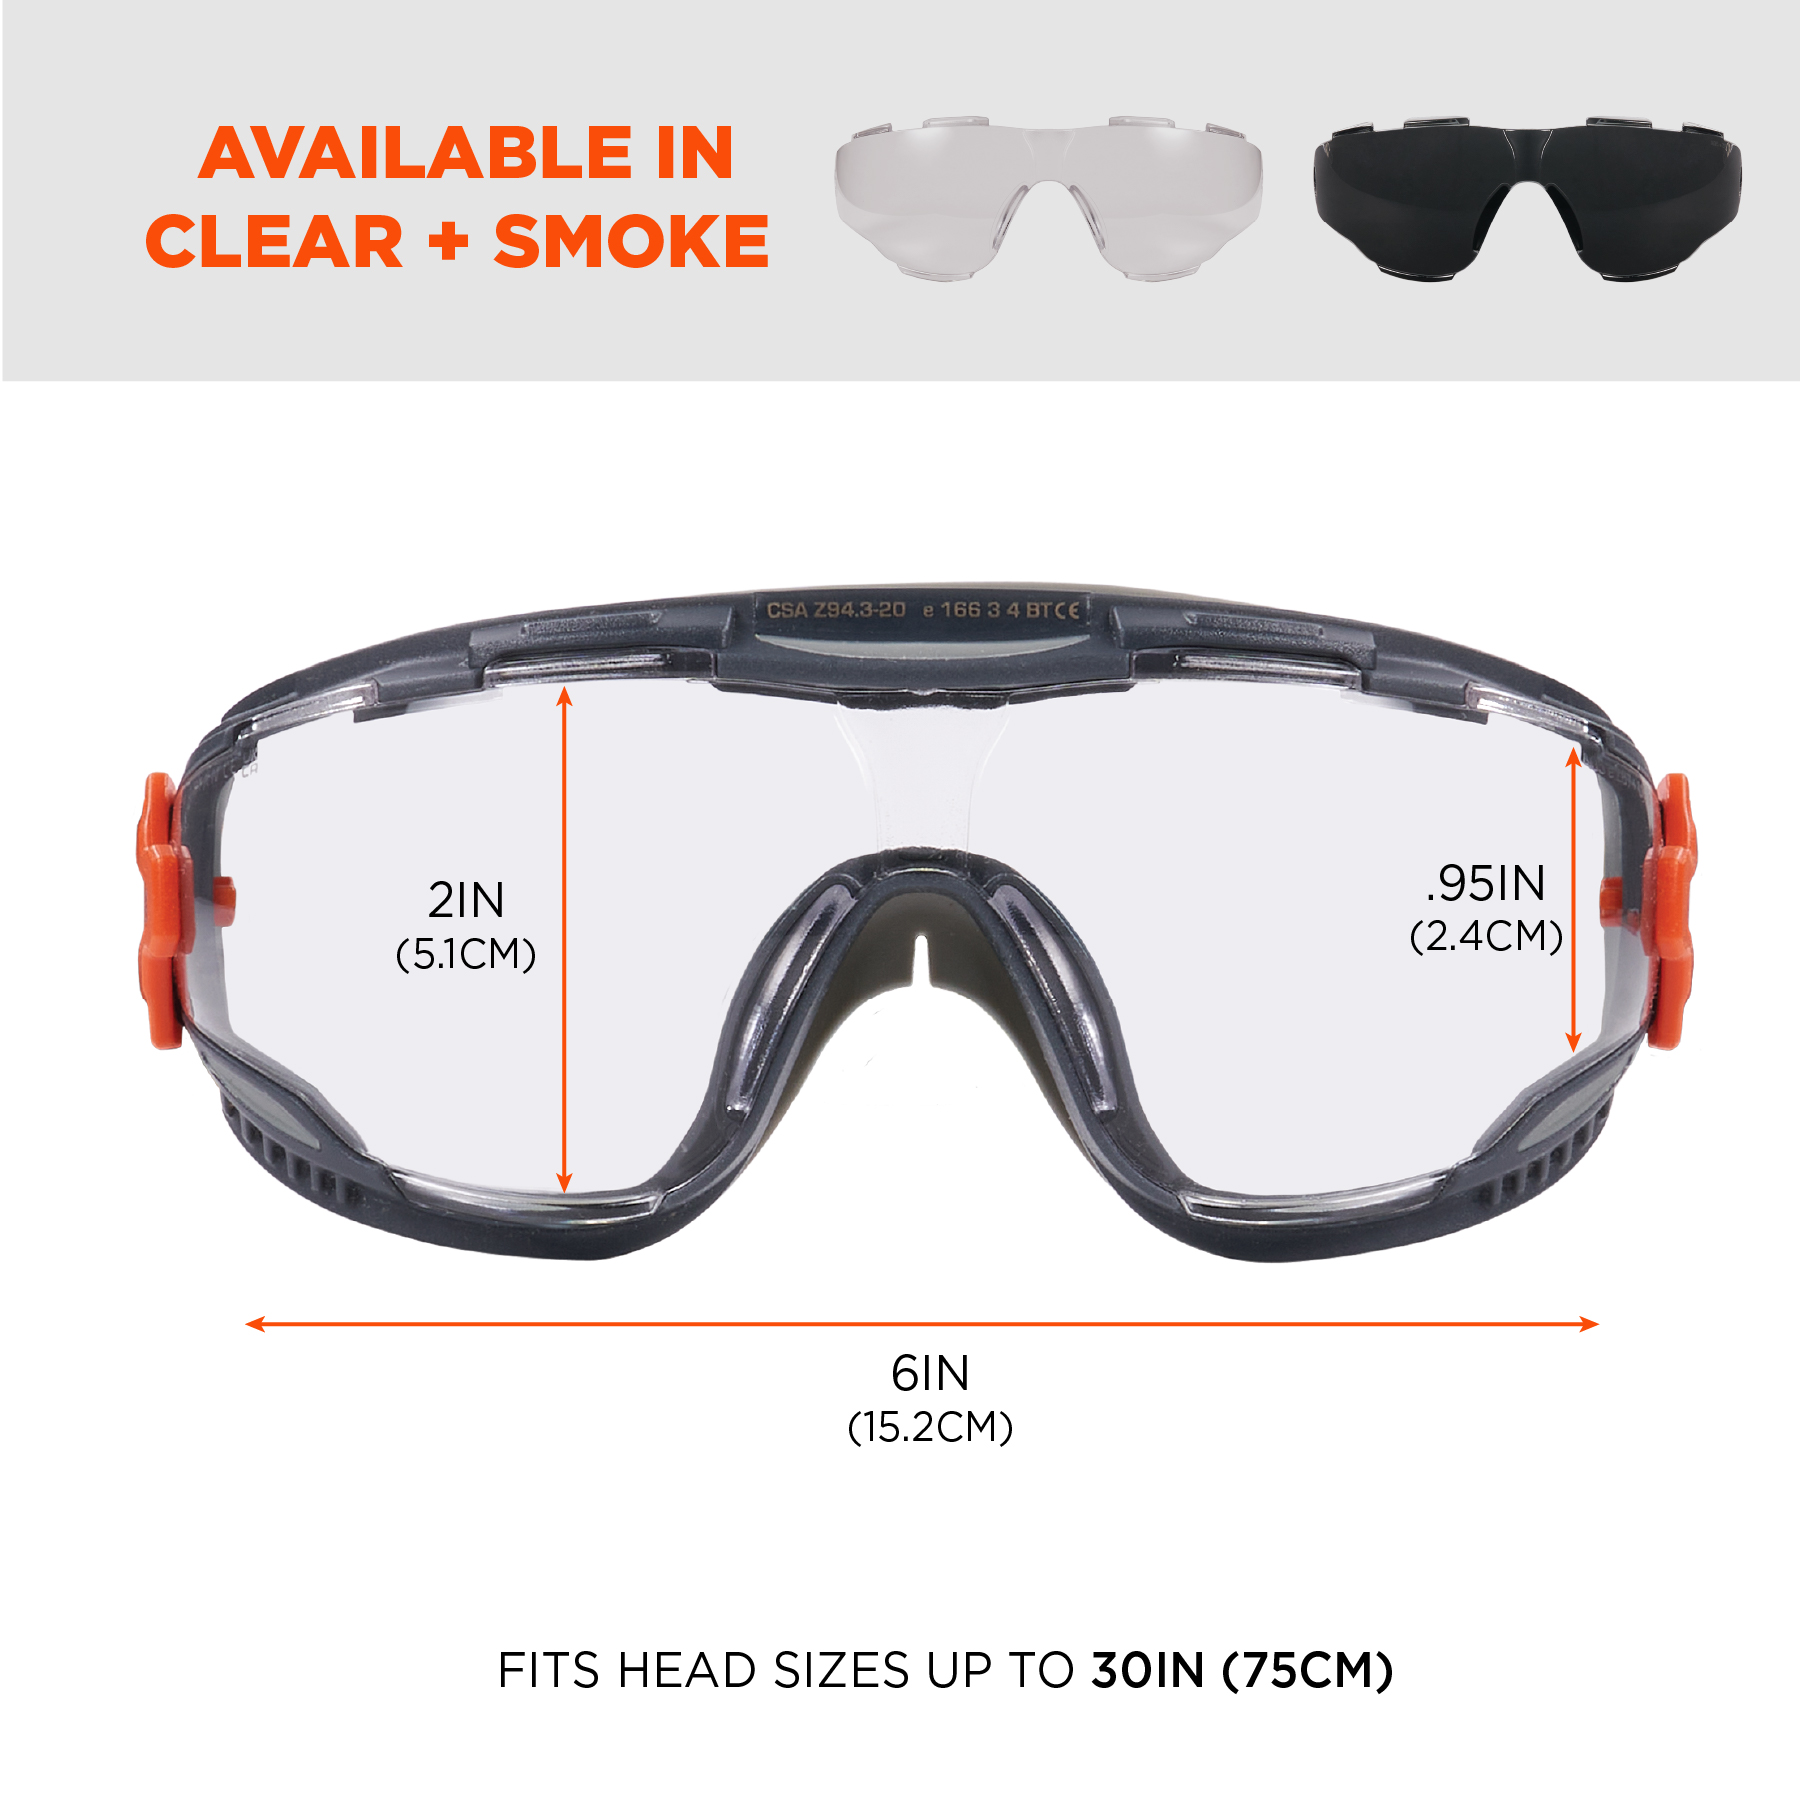 Safety goggles available in clear and smoke